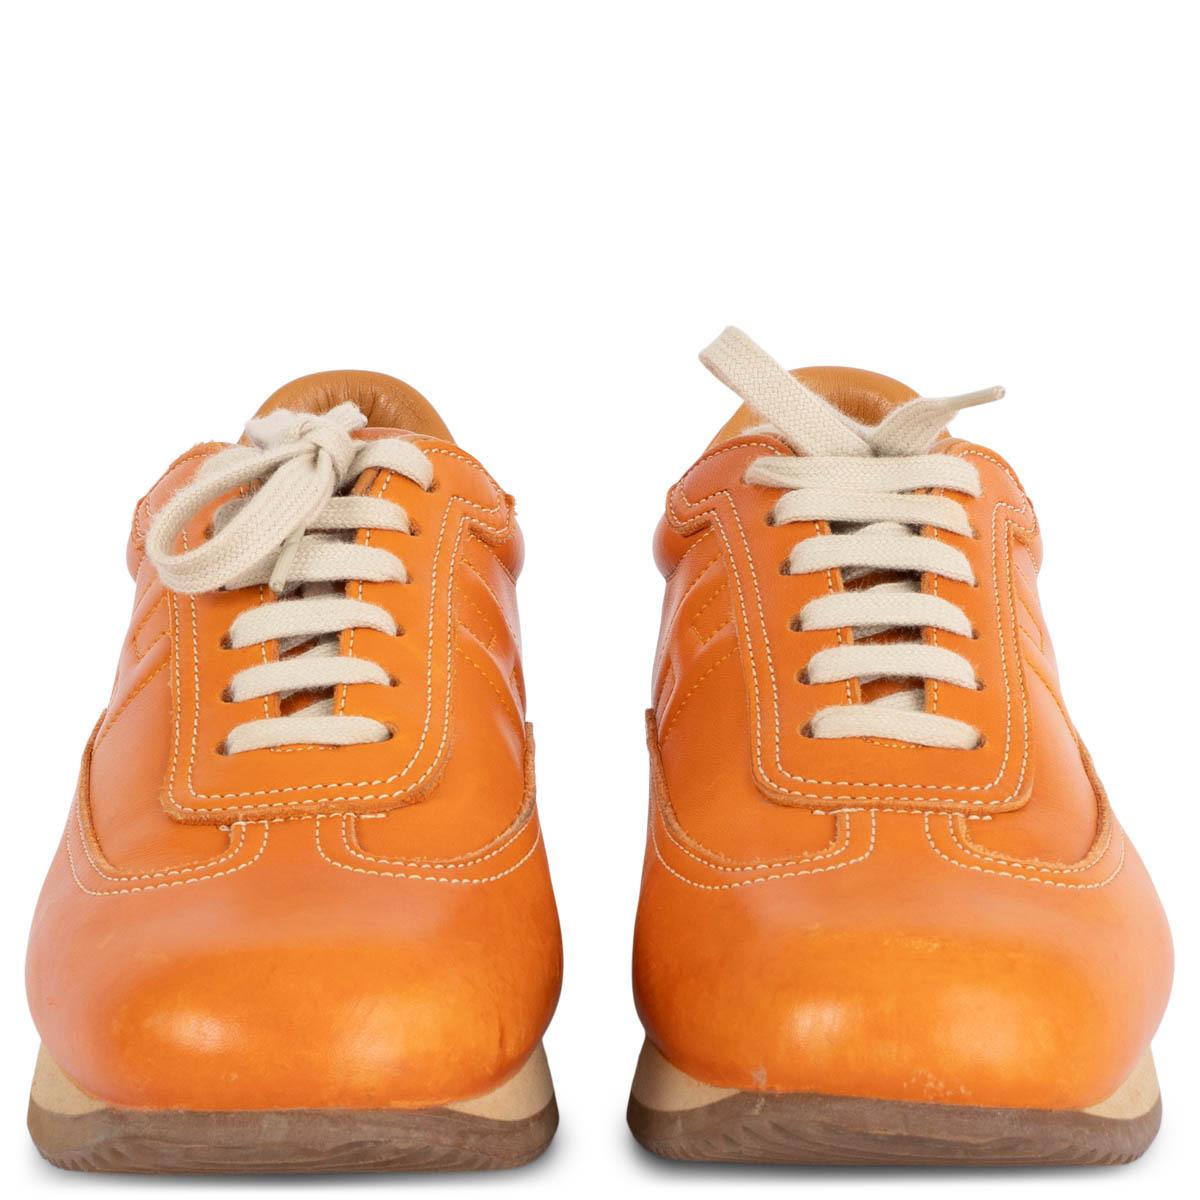 100% authentic Hermès Quick sneakers in smooth orange calfskin featuring beige rubber sole. Have been worn and show some soft patina to the leather. Overall in very good condition. 

Measurements
Imprinted Size	38
Shoe Size	38
Inside Sole	25cm